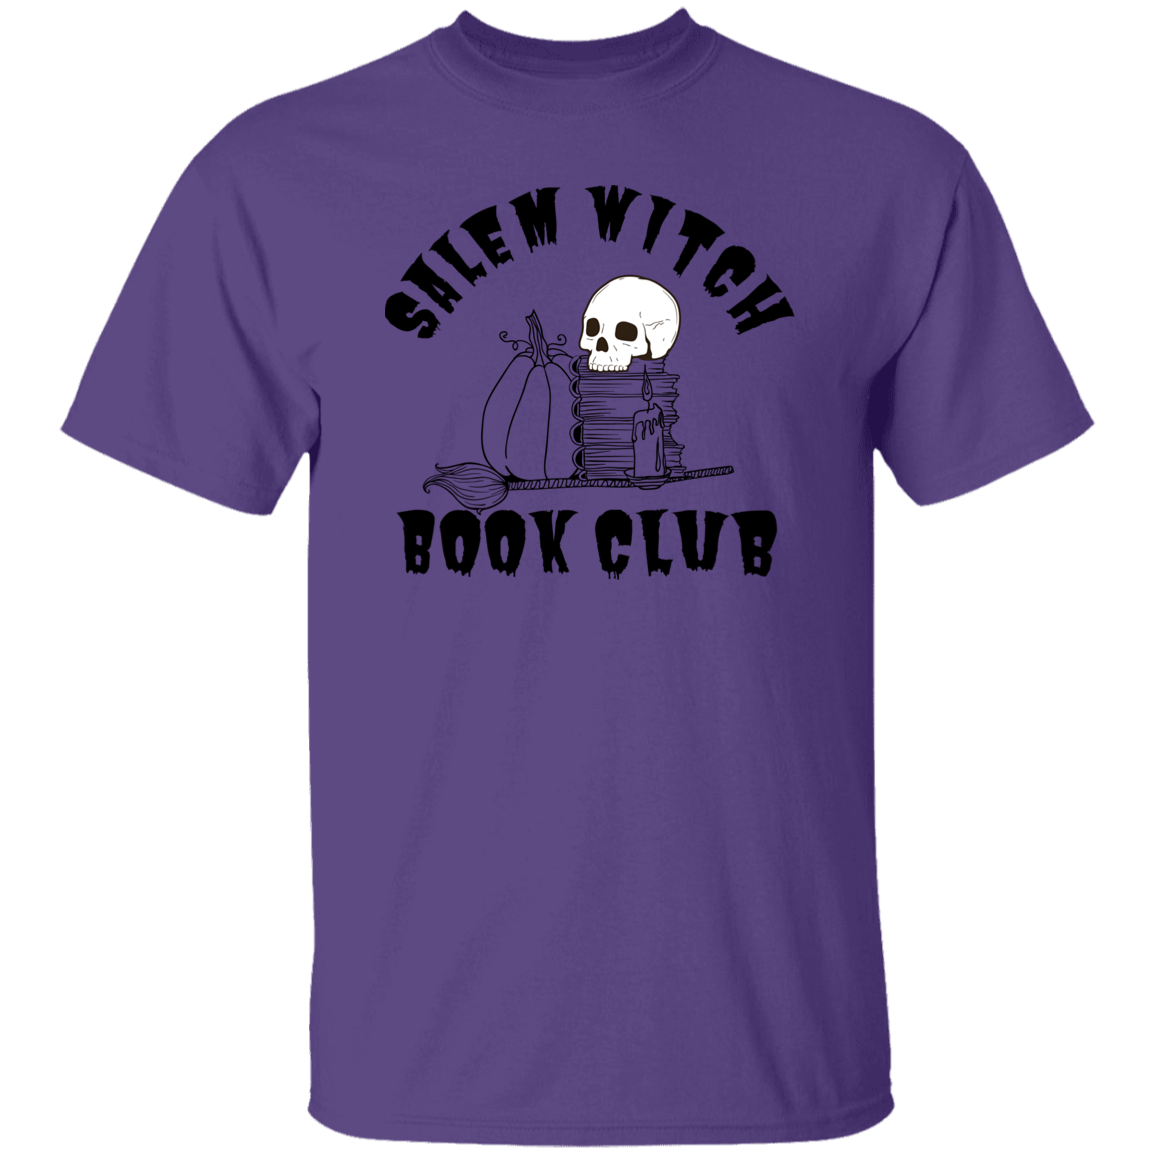 Witches Book Club T-Shirt